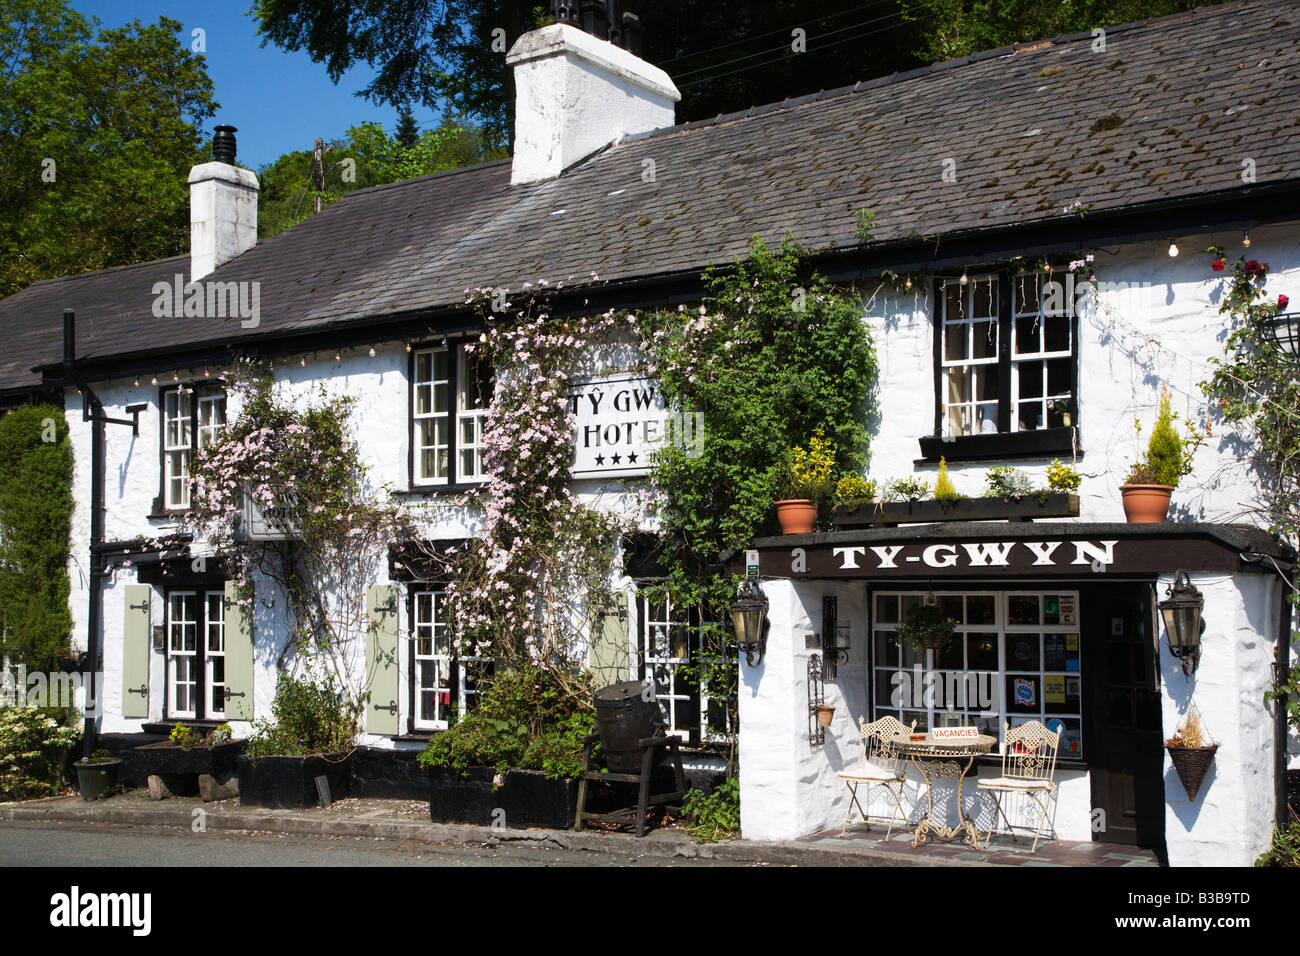 Old Coaching Inn near Betws y Coed Conwy Wales Stock Photo